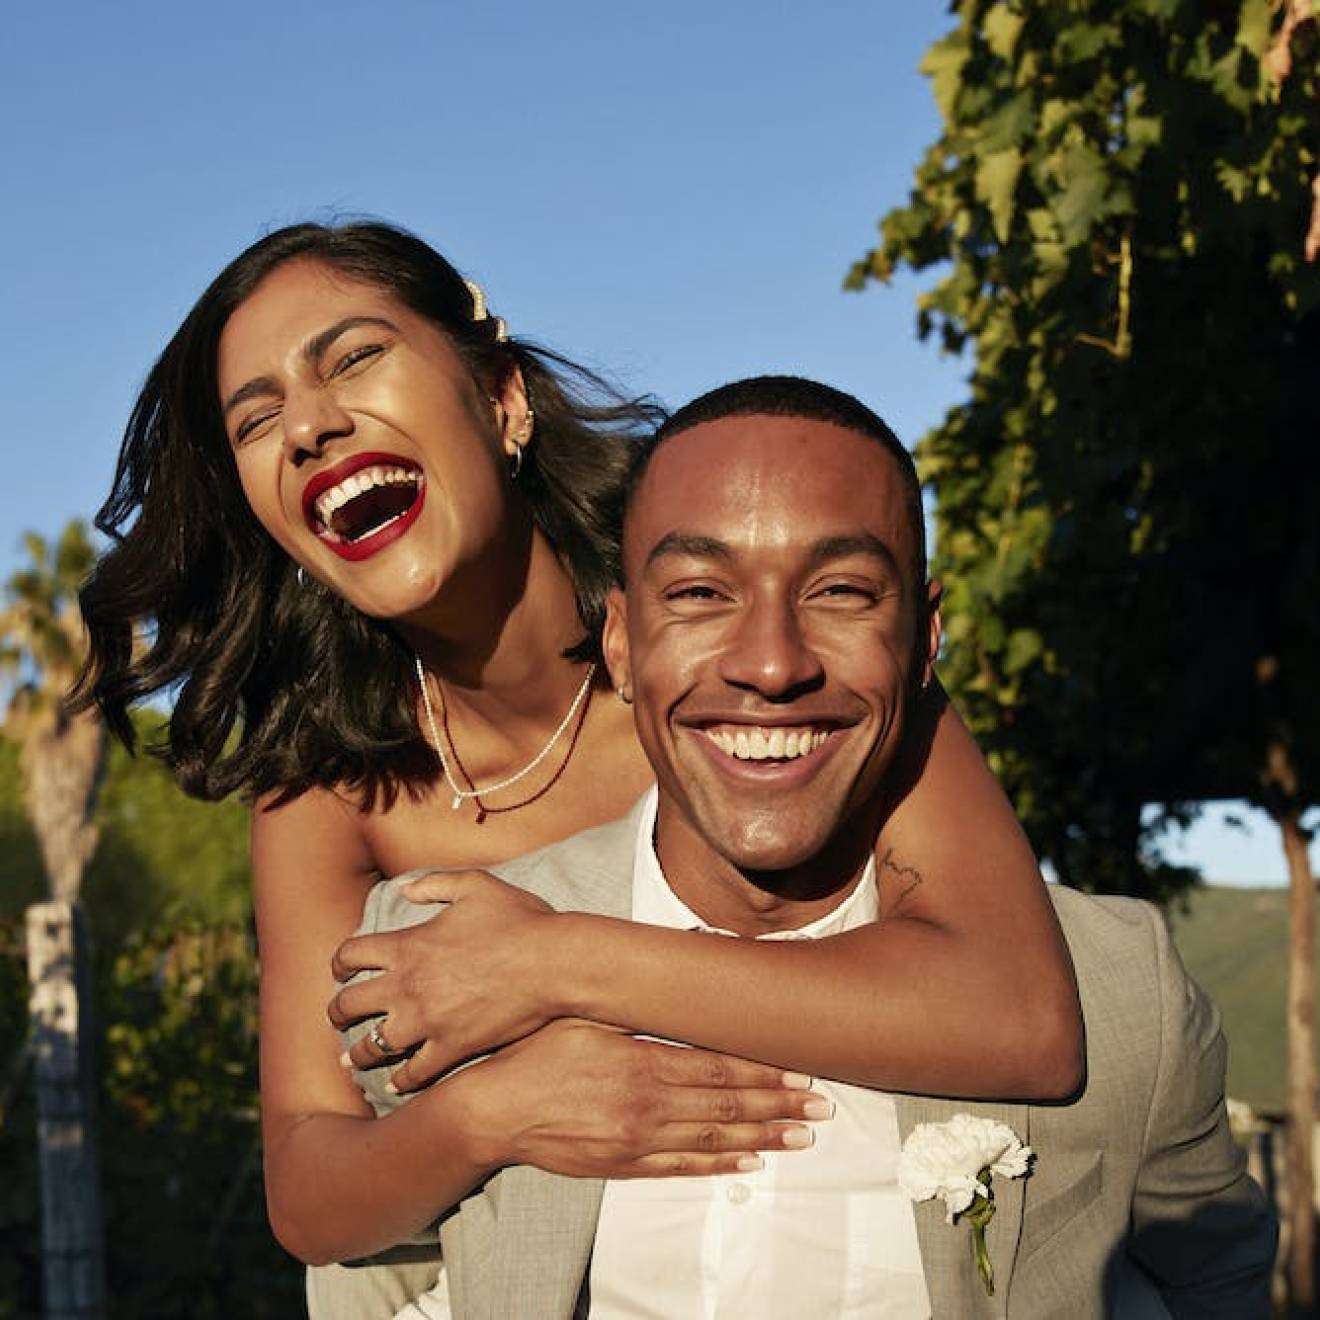 A happy young Latina woman laughing while hanging off the back of a happy young Black man, both in wedding outfits